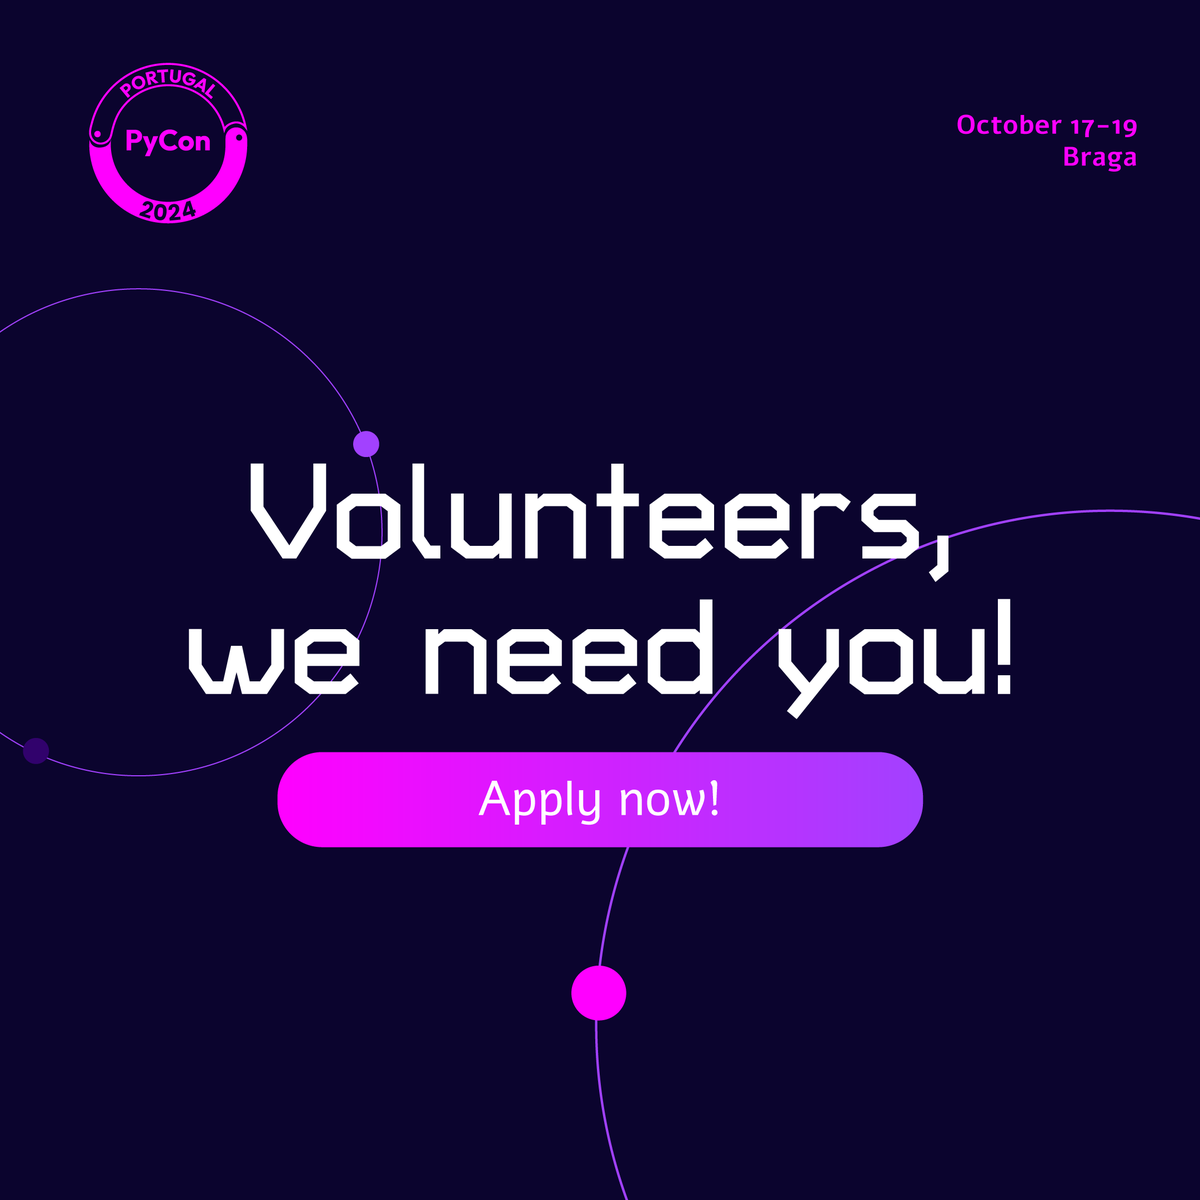 📢 Want to be a part of making PyConPT 24 an epic success? We're looking for volunteers to join our team!

Whether you're a pro or new to the community, your help is invaluable. Apply now to be part of the action: forms.gle/Ps6Sx2NxnRn6ox…

#pyconpt24 #volunteeropportunity